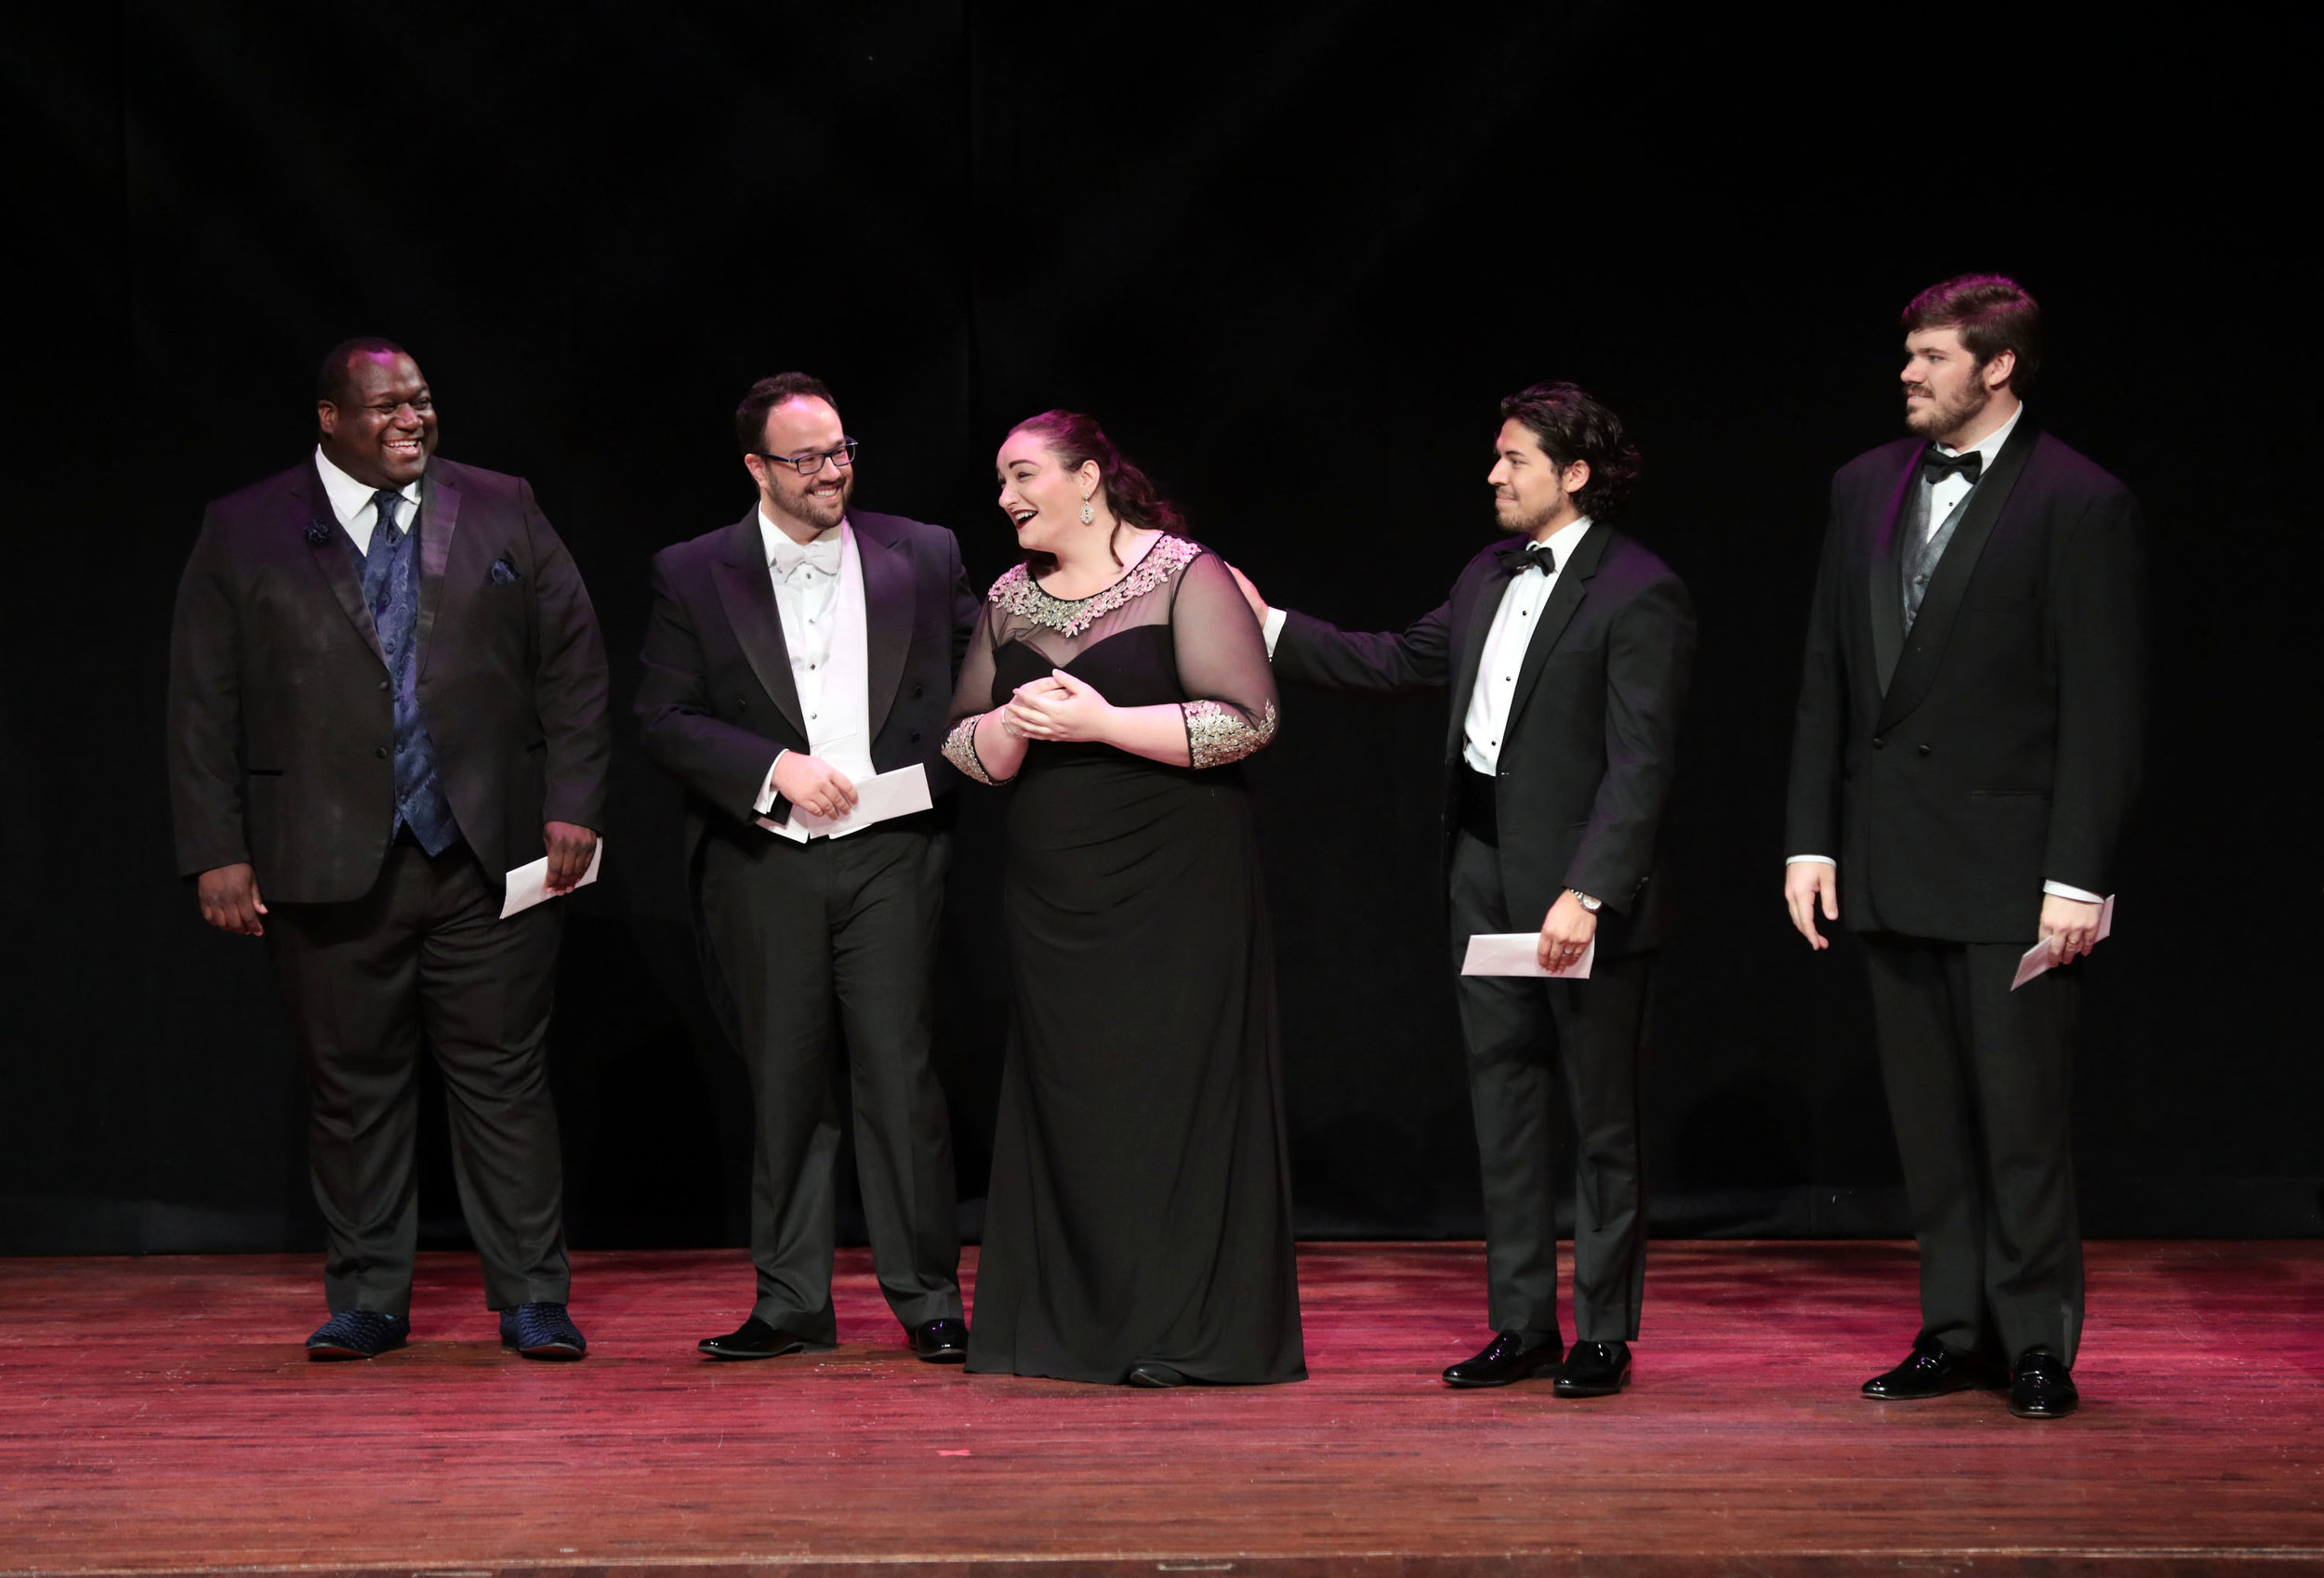  The award ceremony featuring the finalists of the Cooper-Bing Vocal Competition: Reginald Smith Jr. (baritone), Derrek Stark (tenor), Lindsay Kate Brown (mezzo soprano), Ethan Vincent (baritone), and Jesse Donner (tenor) 